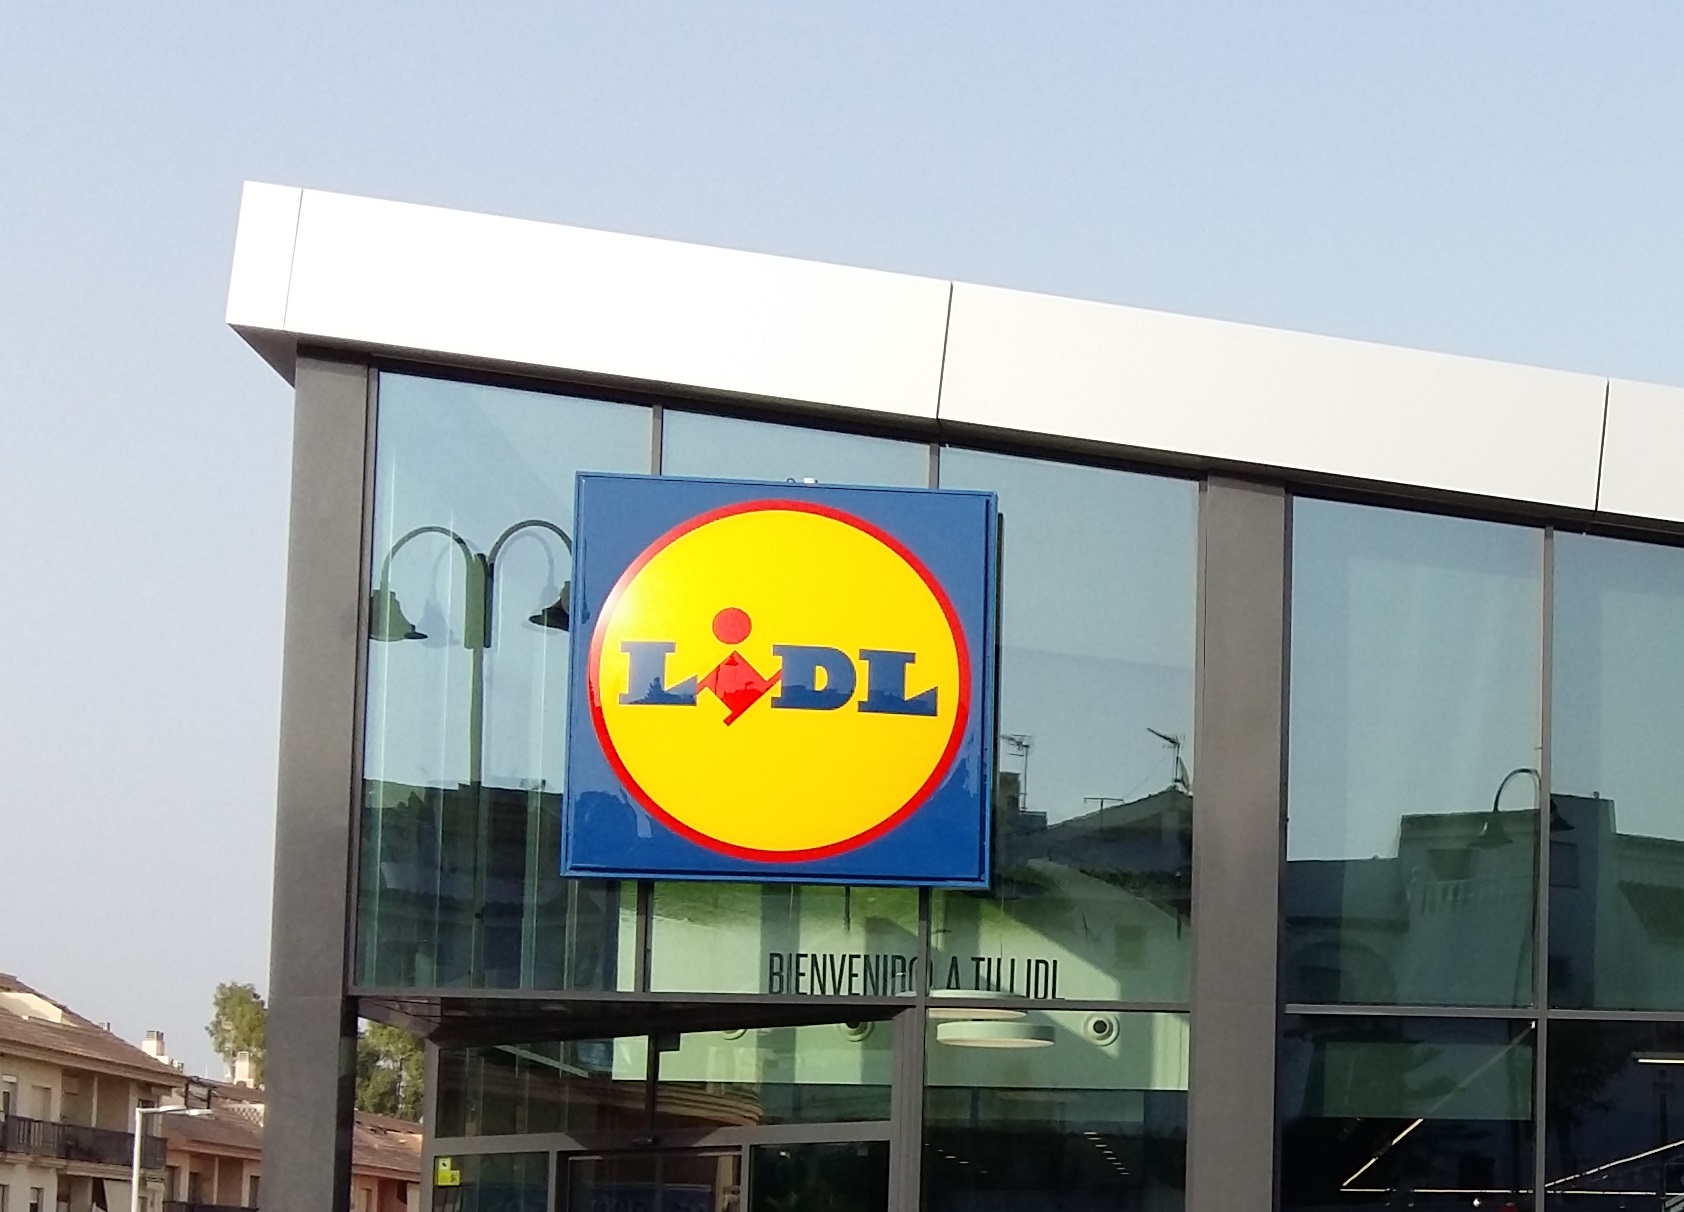 Farmers have used Lidl's fast-rising status in the retail world to showcase local produce